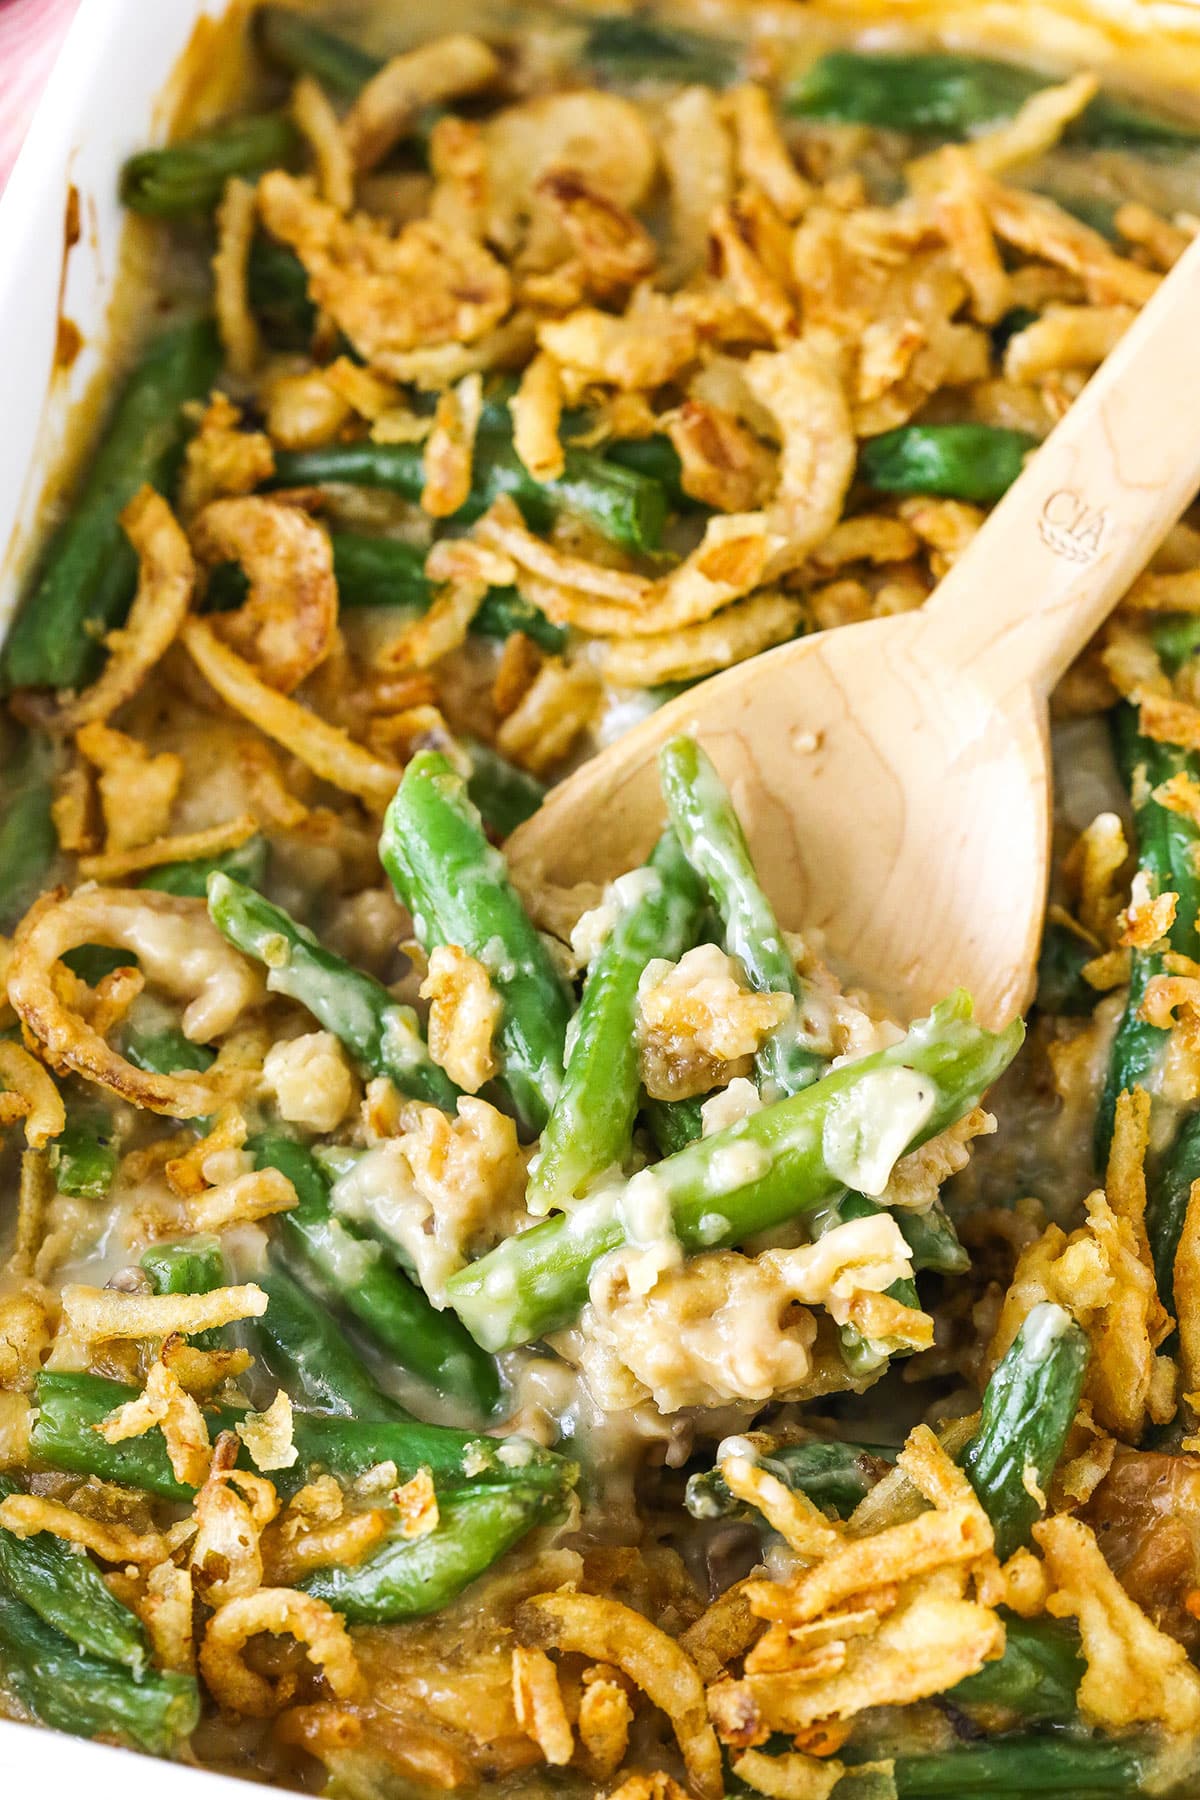 Green bean casserole topped with cheddar and fried onions.